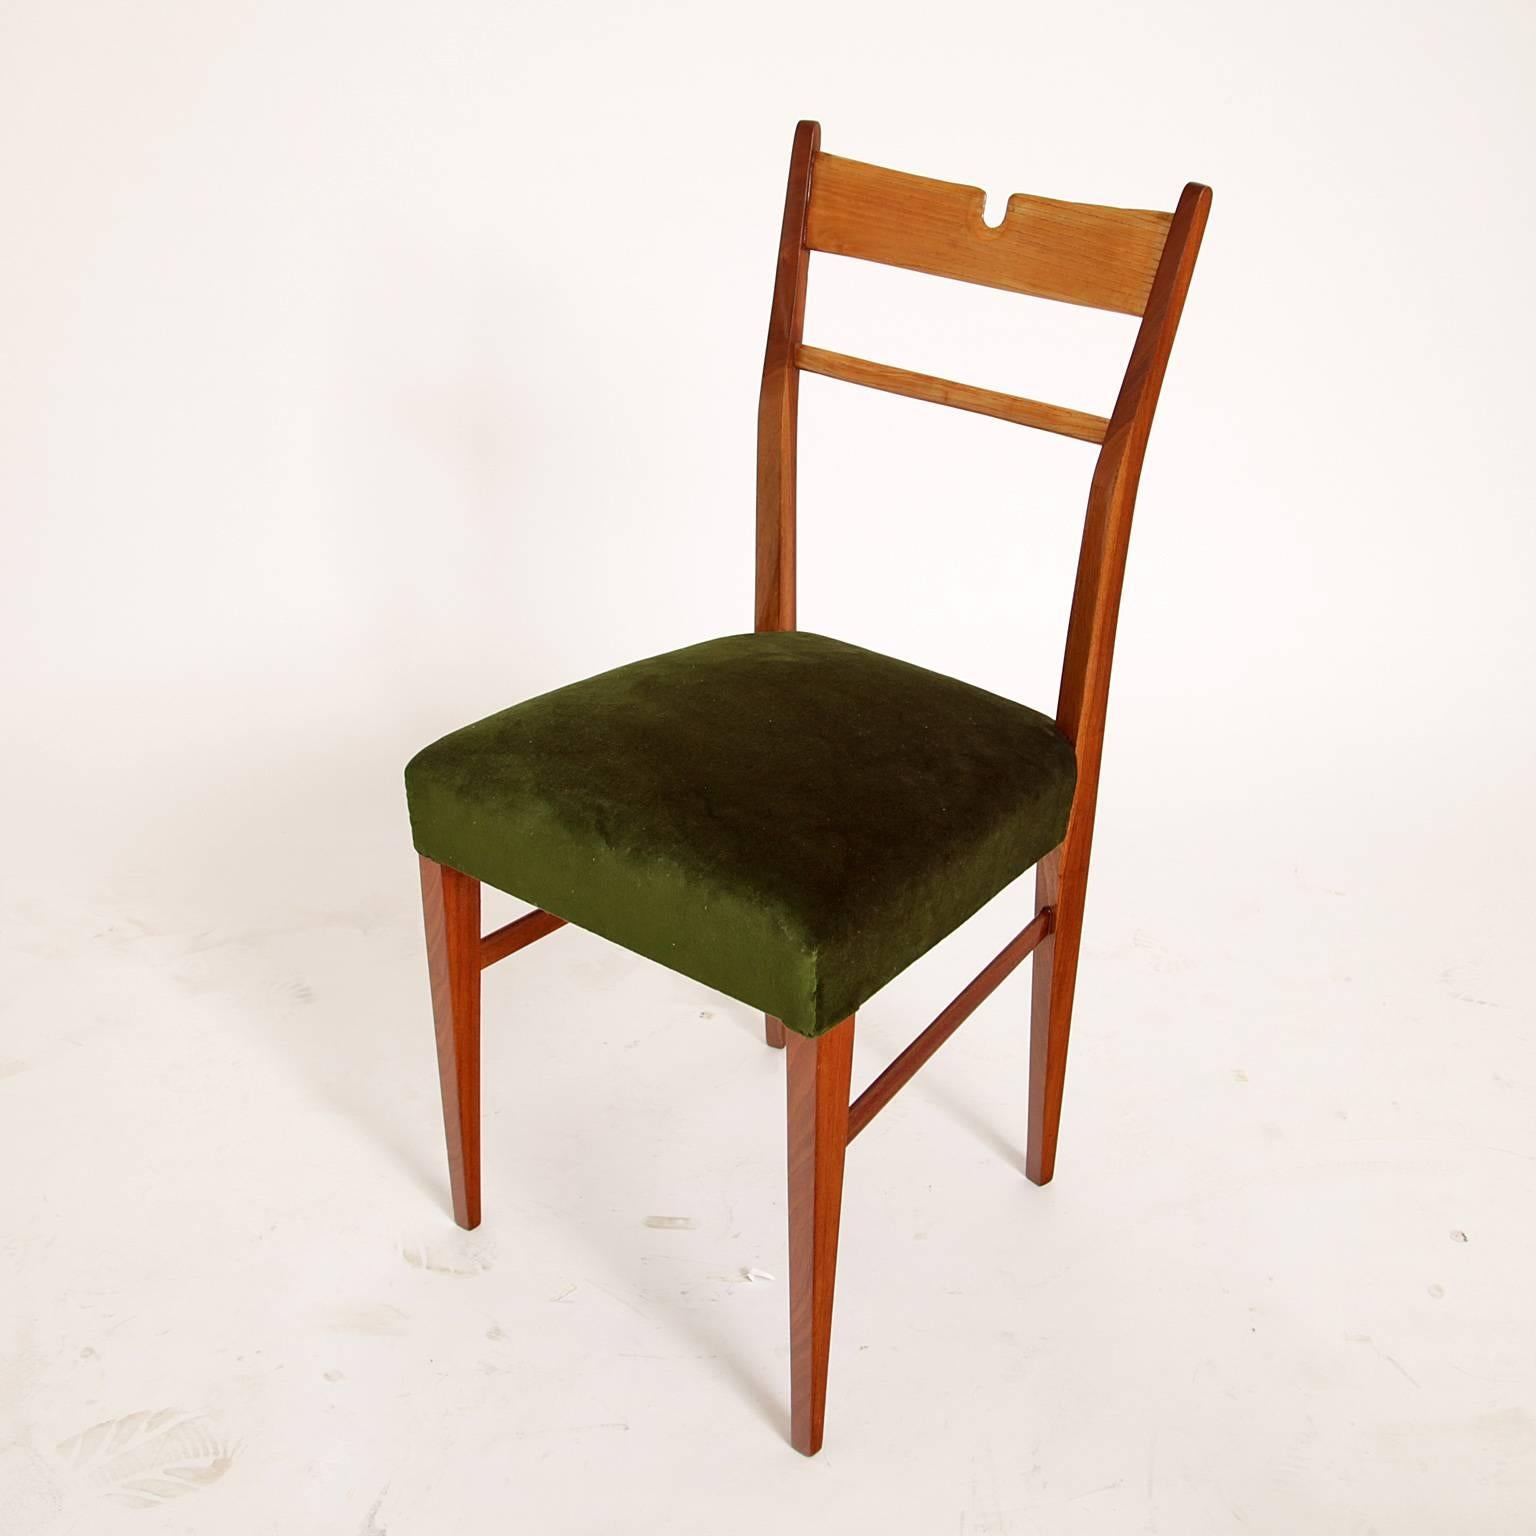 Four chairs on conical tapered legs. The backrest has a small strutting and a u-shaped cutout. The chairs are newly upholstered with a green, high quality velvet fabric.